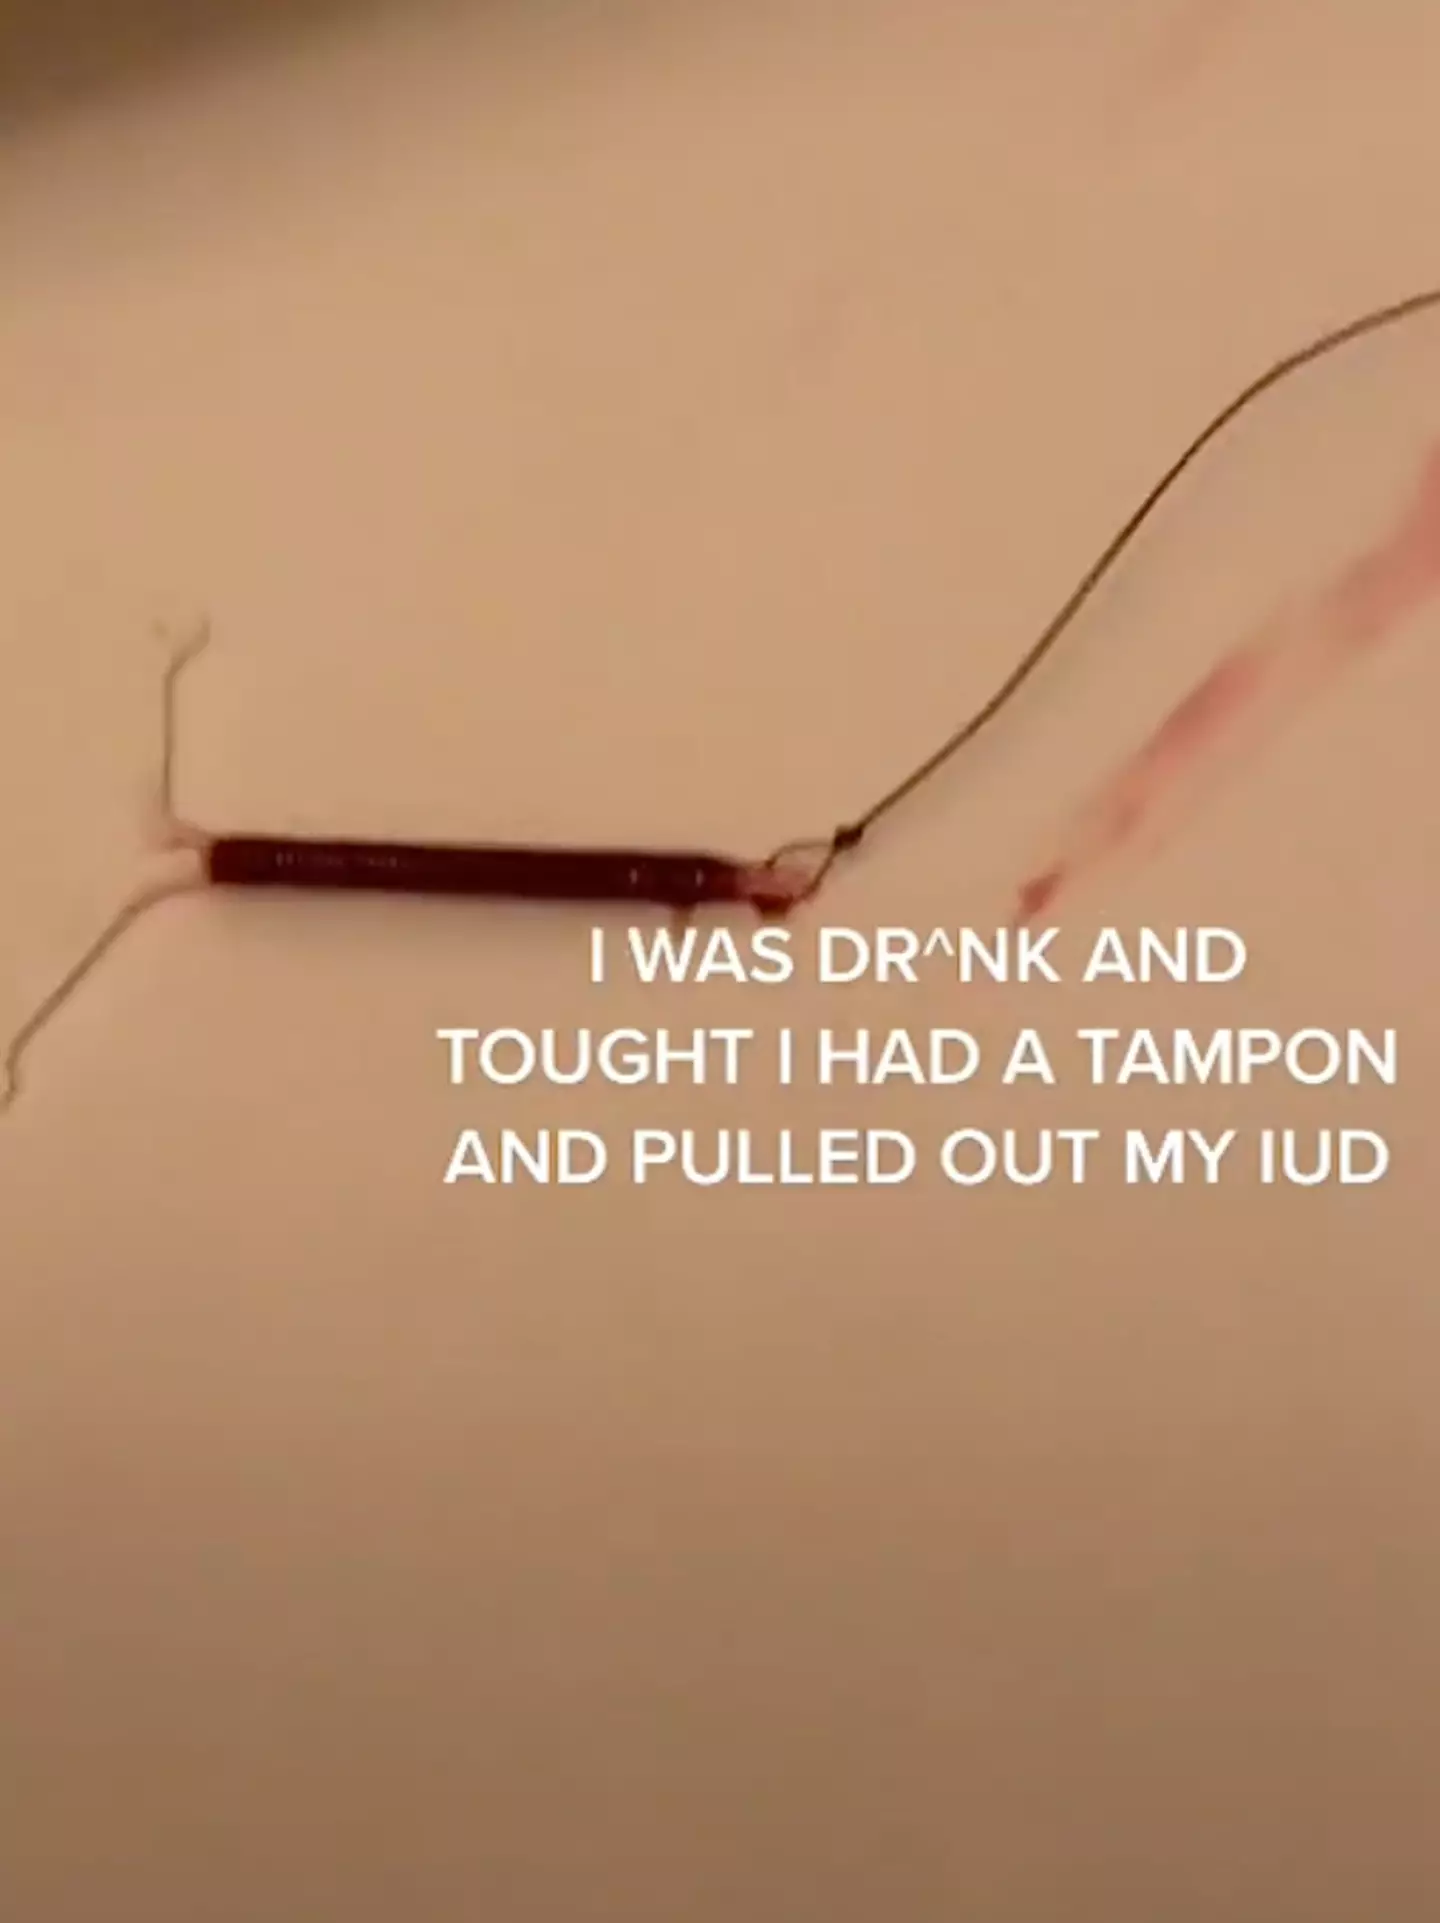 Natalia explained she accidentally removed her IUD (